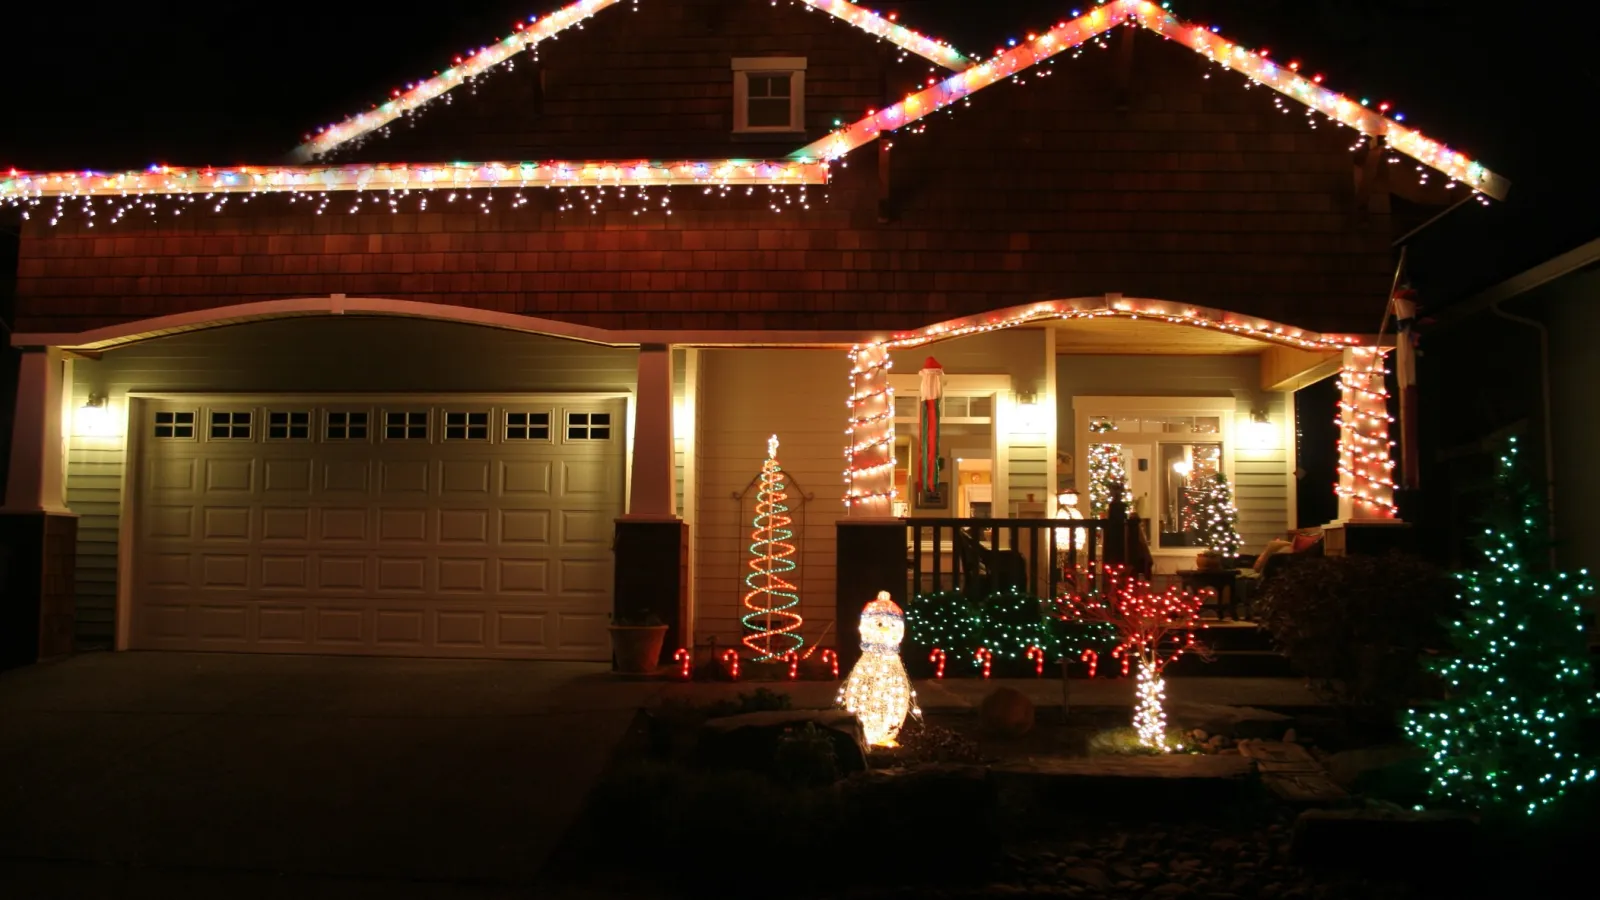 8 Things To Do To Prepare Your Home for the Holidays